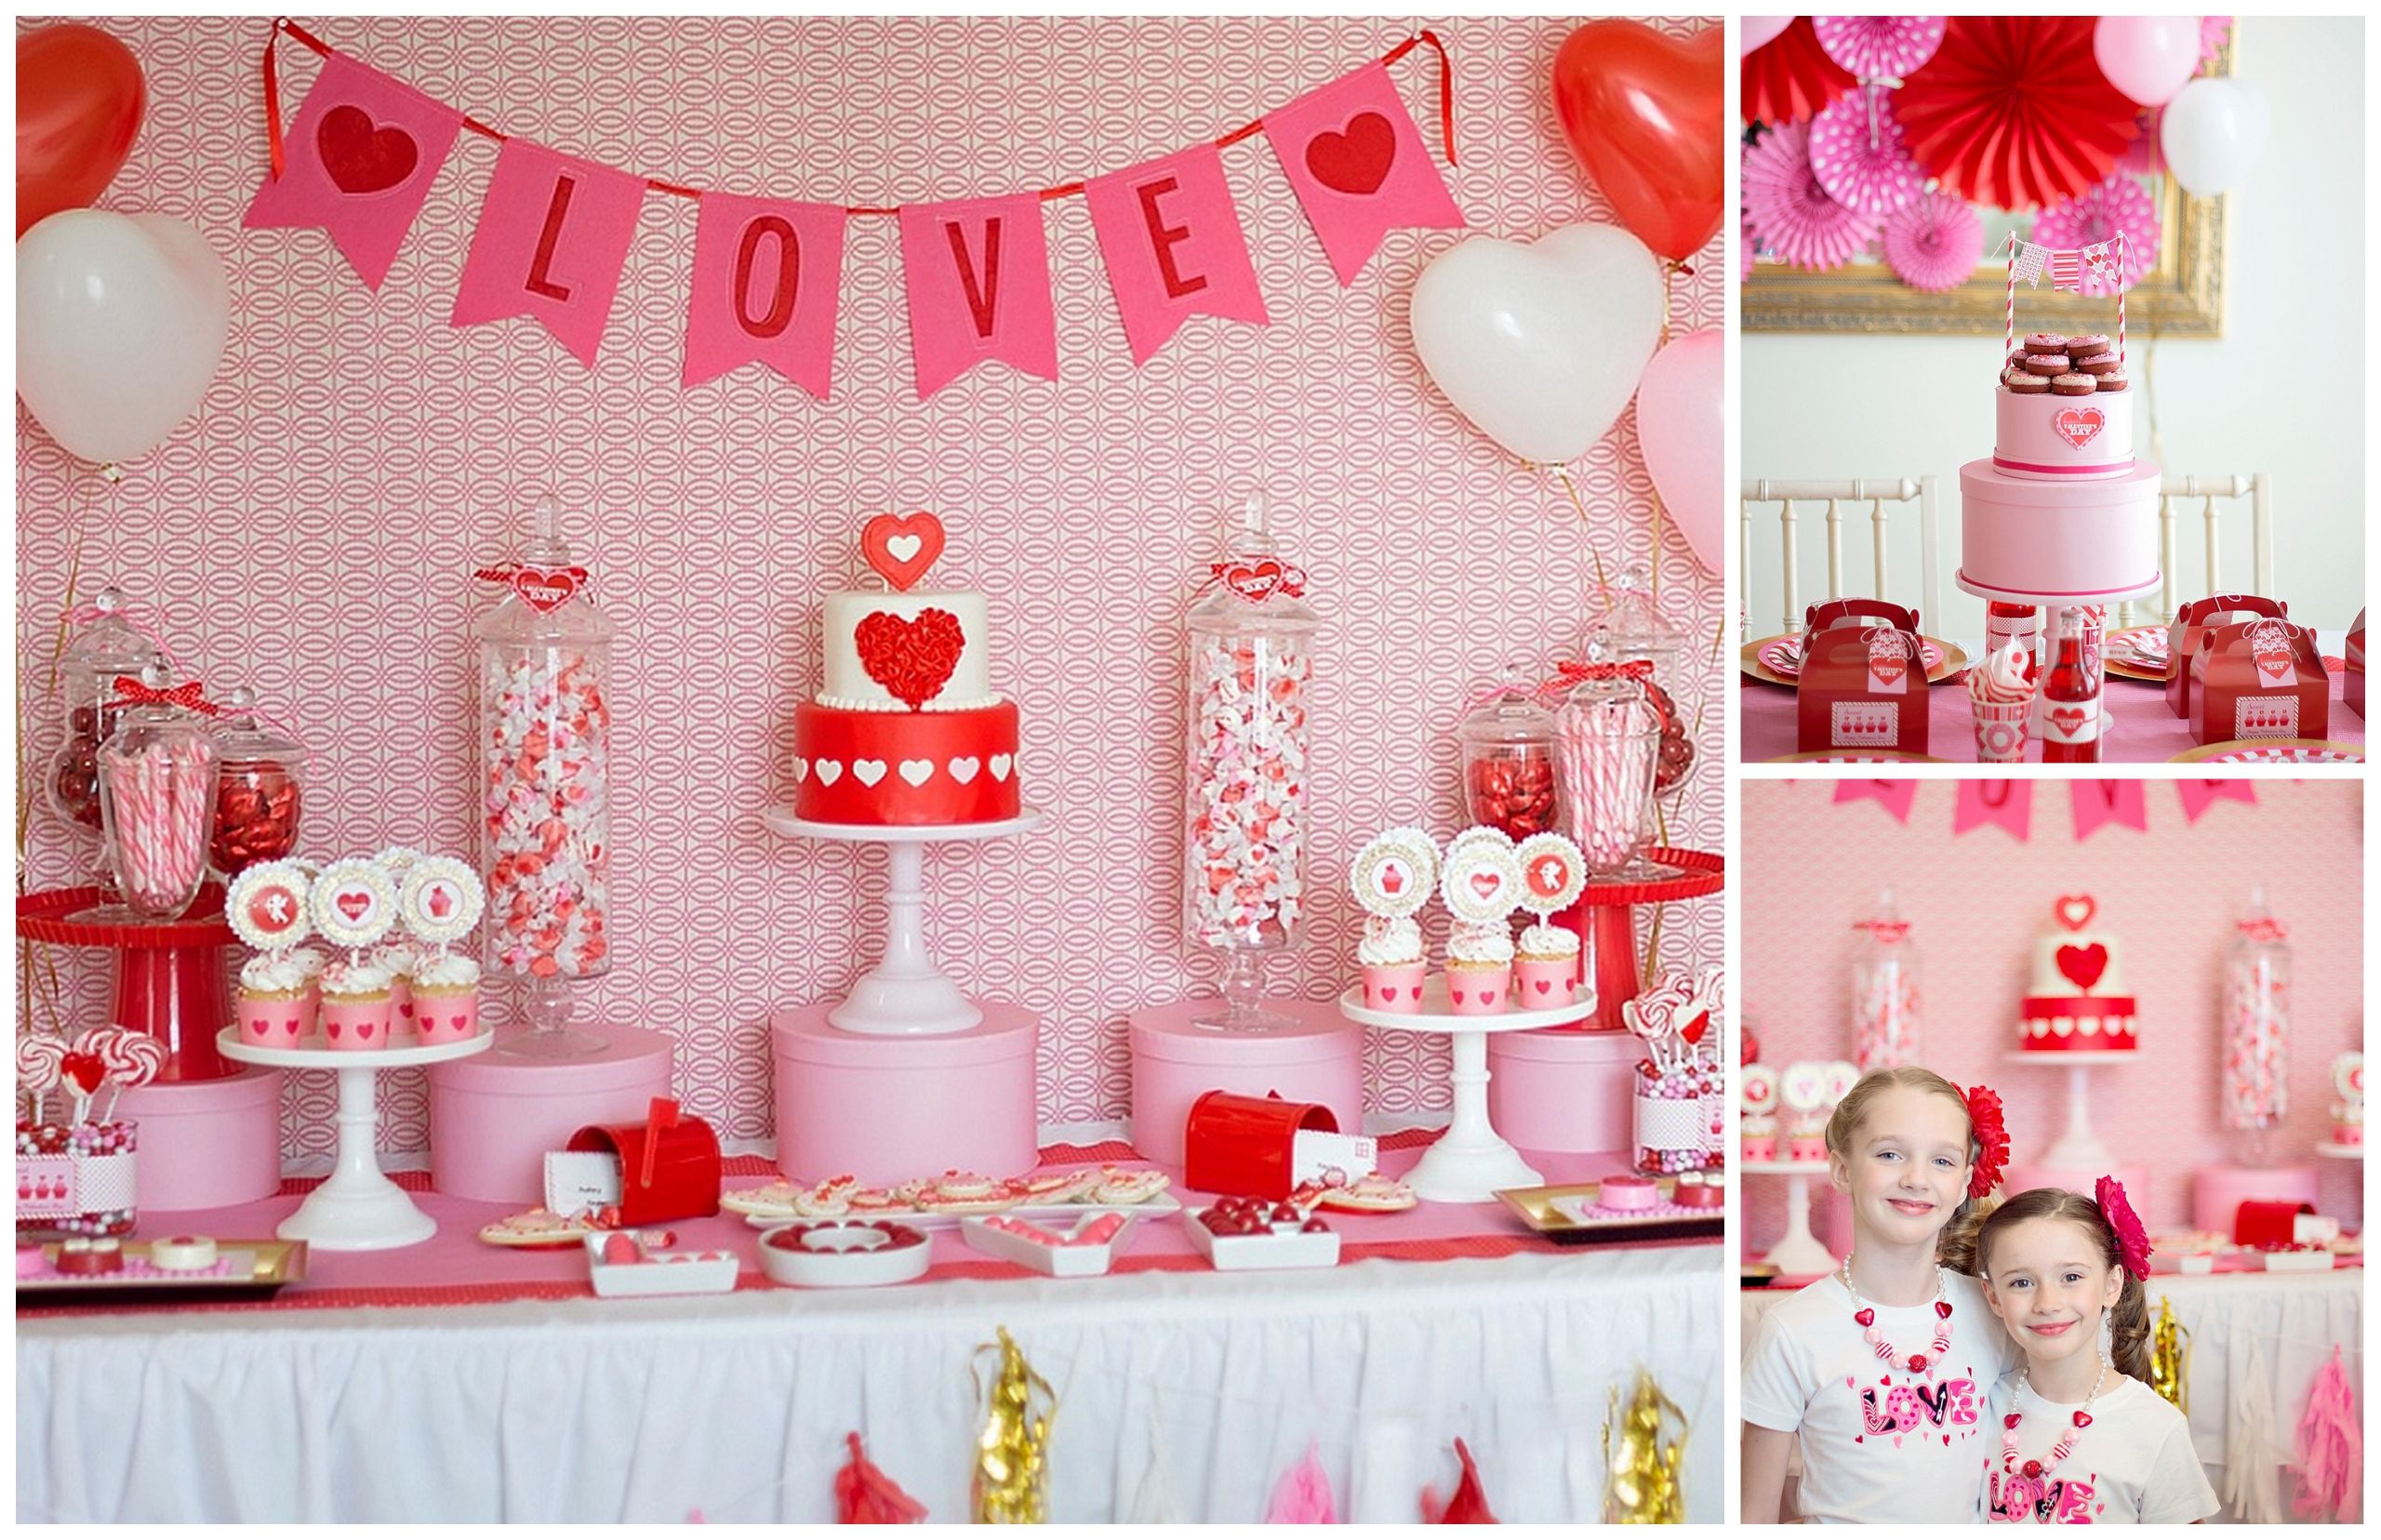 Valentines Day Party Decoration
 A Sweet Valentine s Day Party Anders Ruff Custom Designs